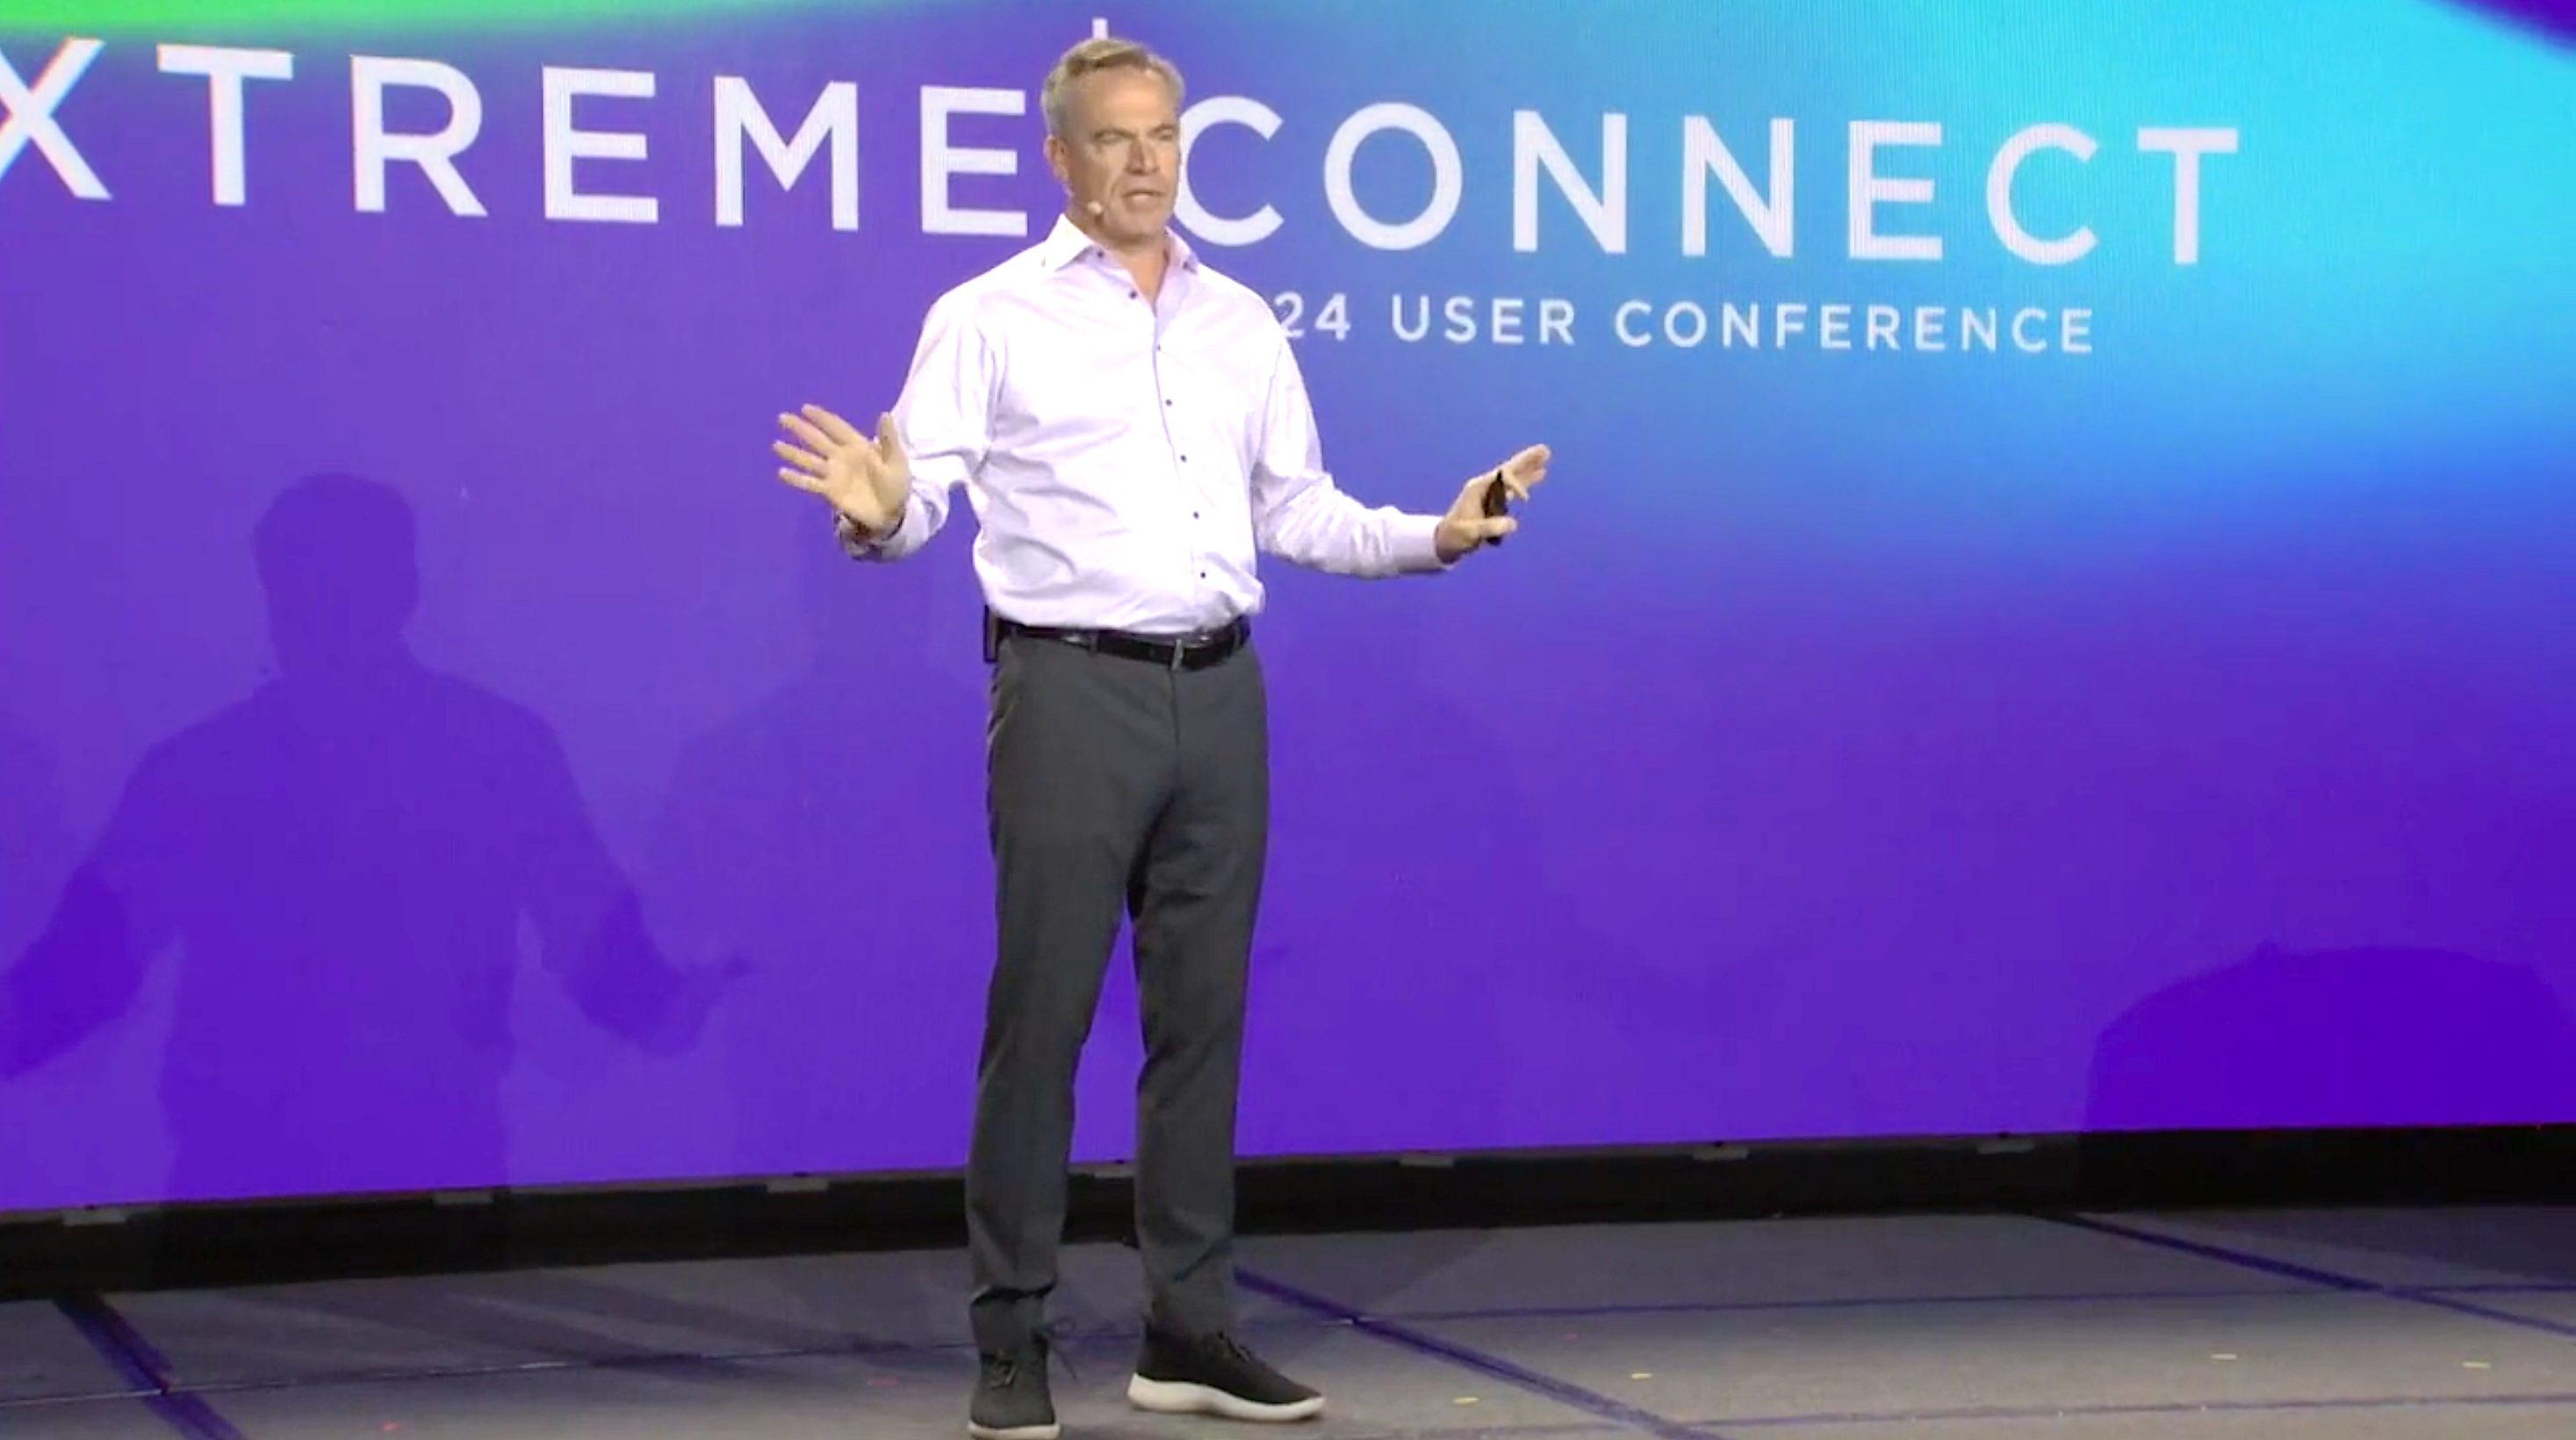 Five thoughts from Extreme Networks’ Connect user conference